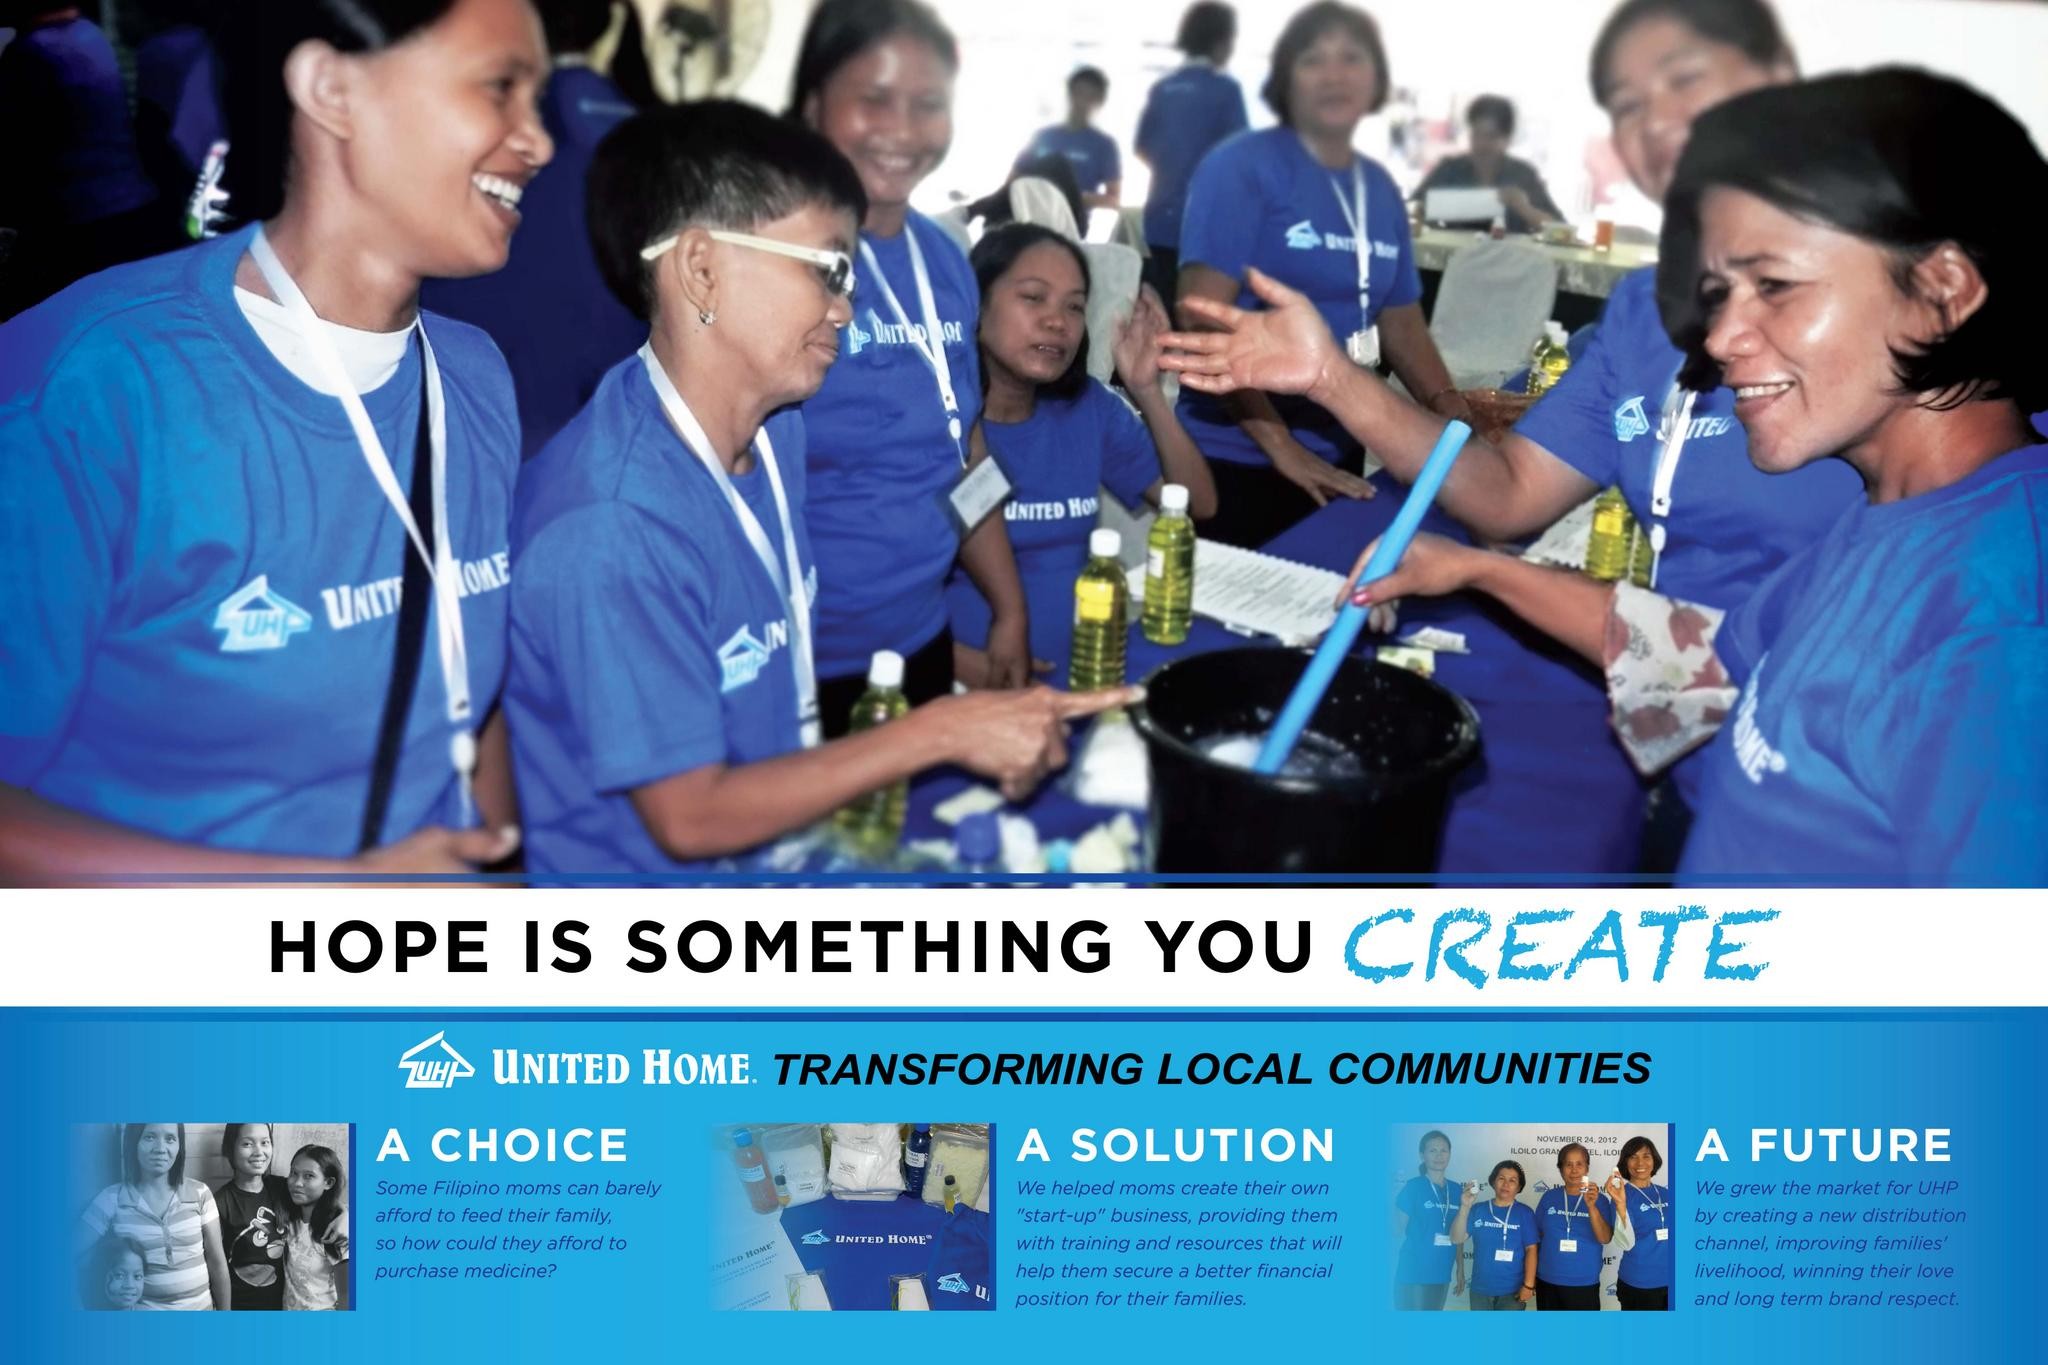 UNITED HOME PRODUCTS (UHP) – TRANSFORMING LOCAL COMMUNITIES